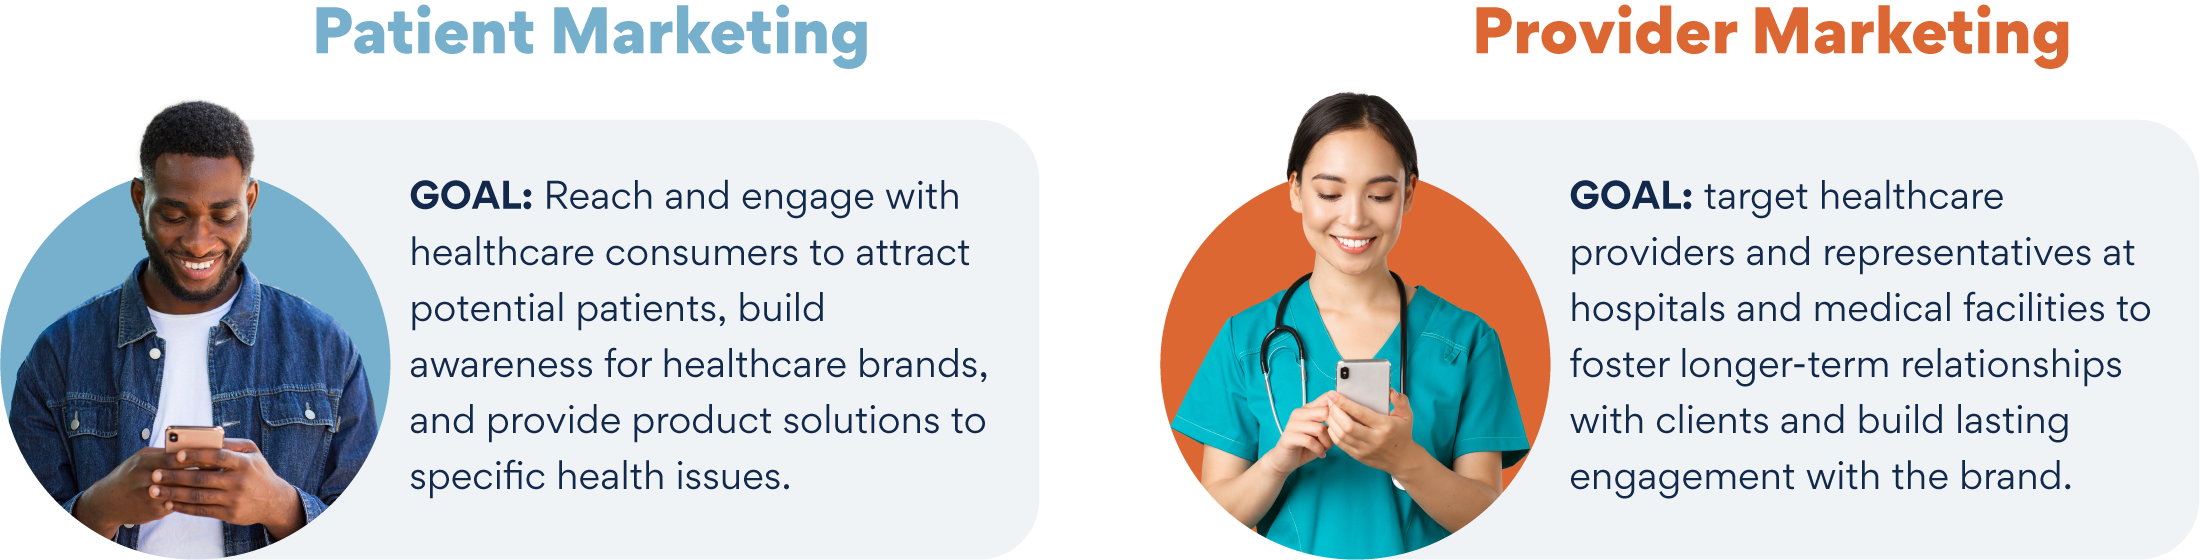 infographic explaining the different goals between patient marketing and provider marketing. One is to reach and engage potential patients and the other is to facilitate long-term relationships with providers